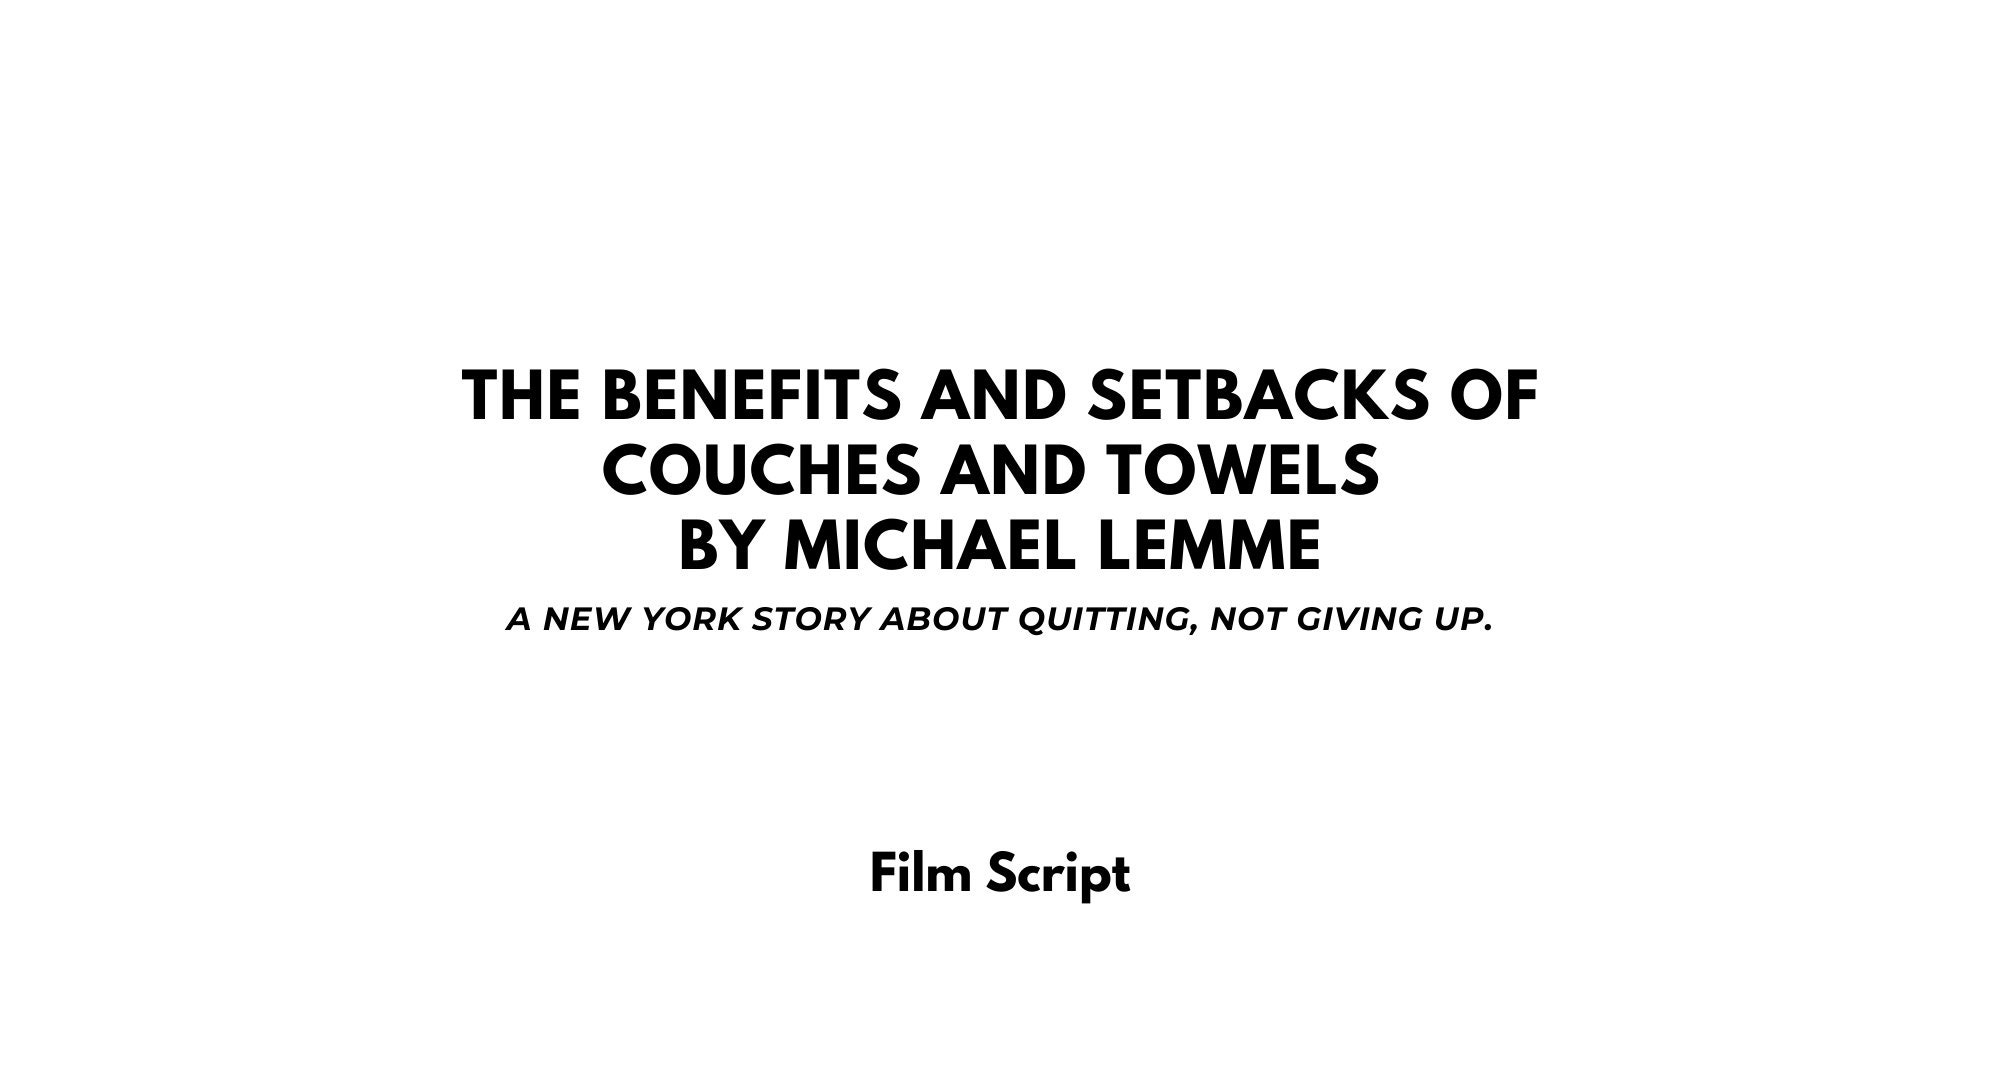 A Comedy Script That Will Become a Comedy Movie... - Etsy New Zealand